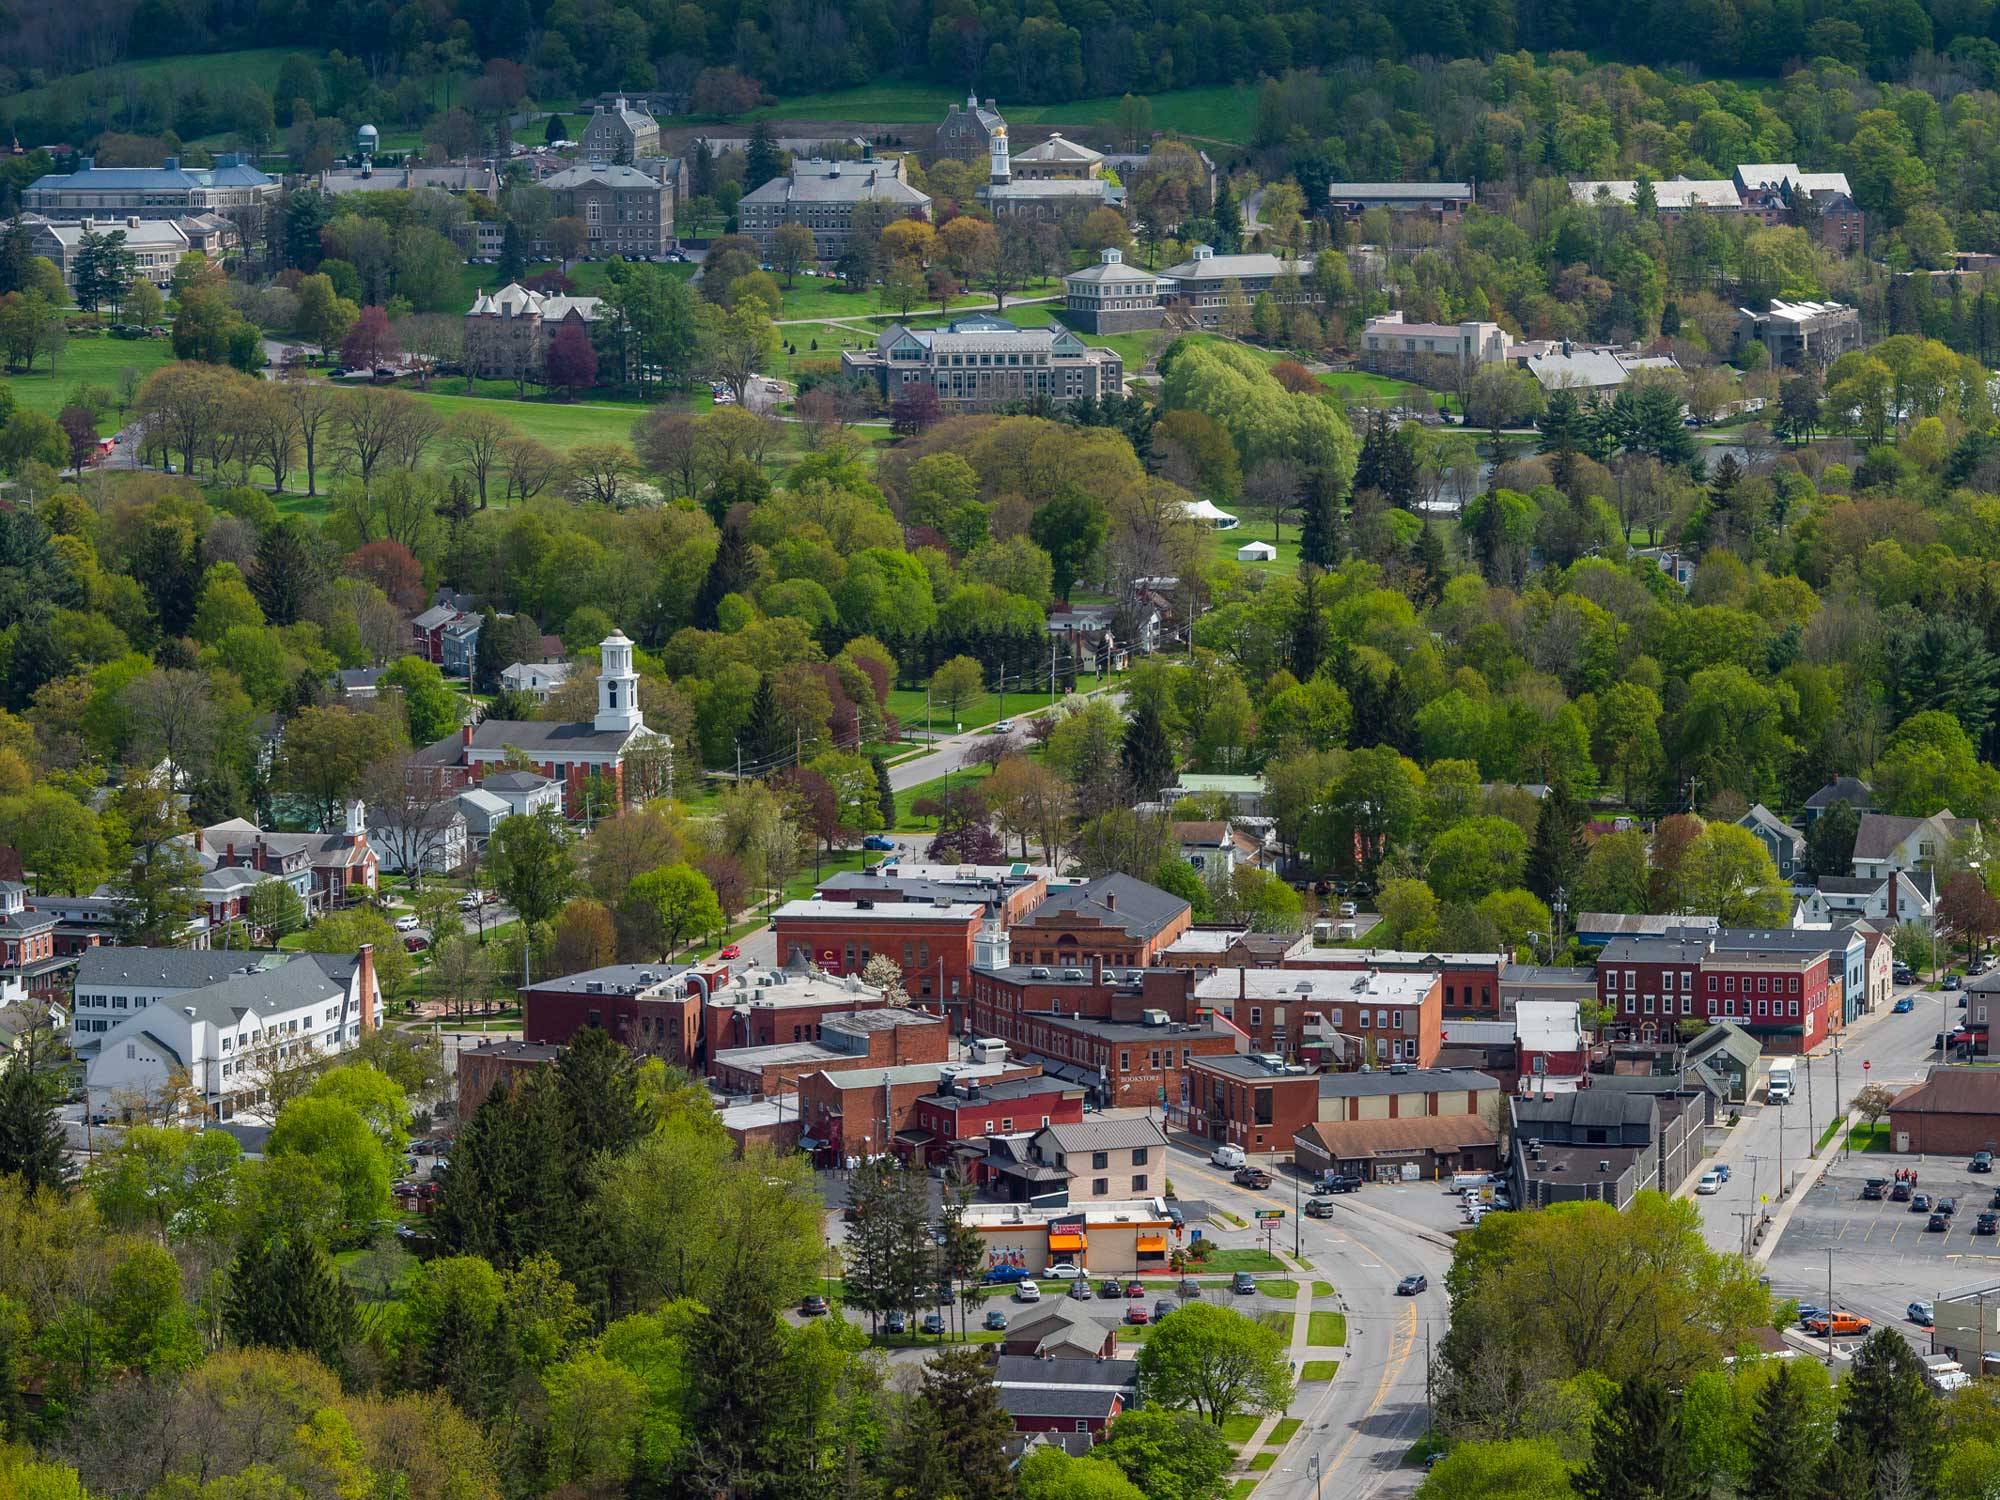 Aerial view of the Village of Hamilton and Colgate